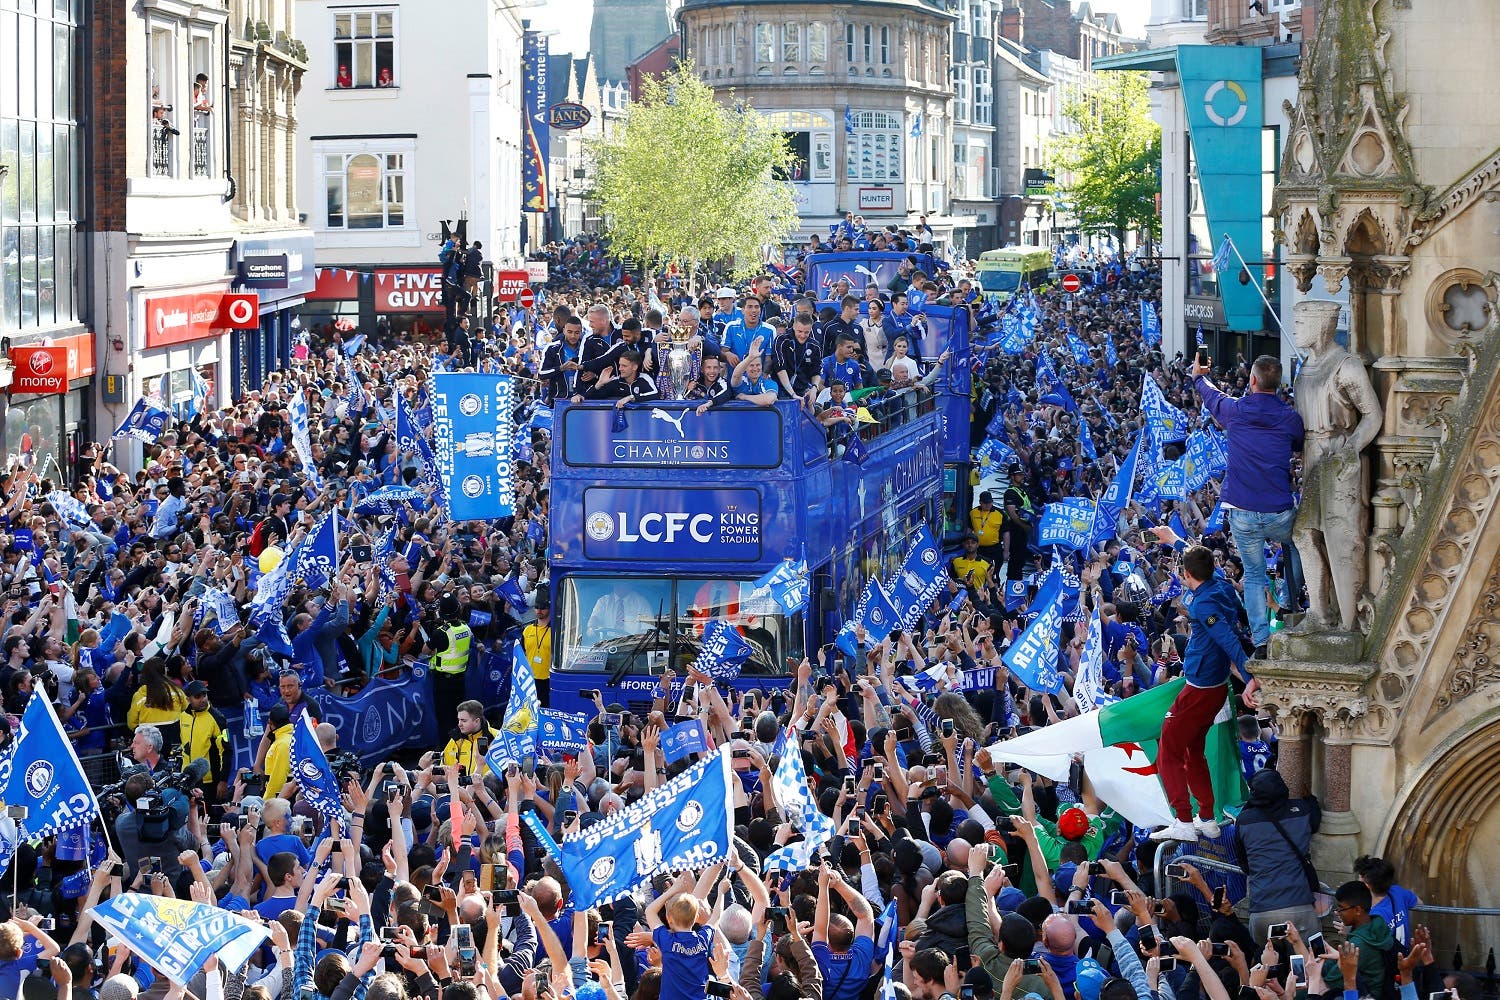 eicester City celebrate with the trophy on the bus during the parade (Reuters)